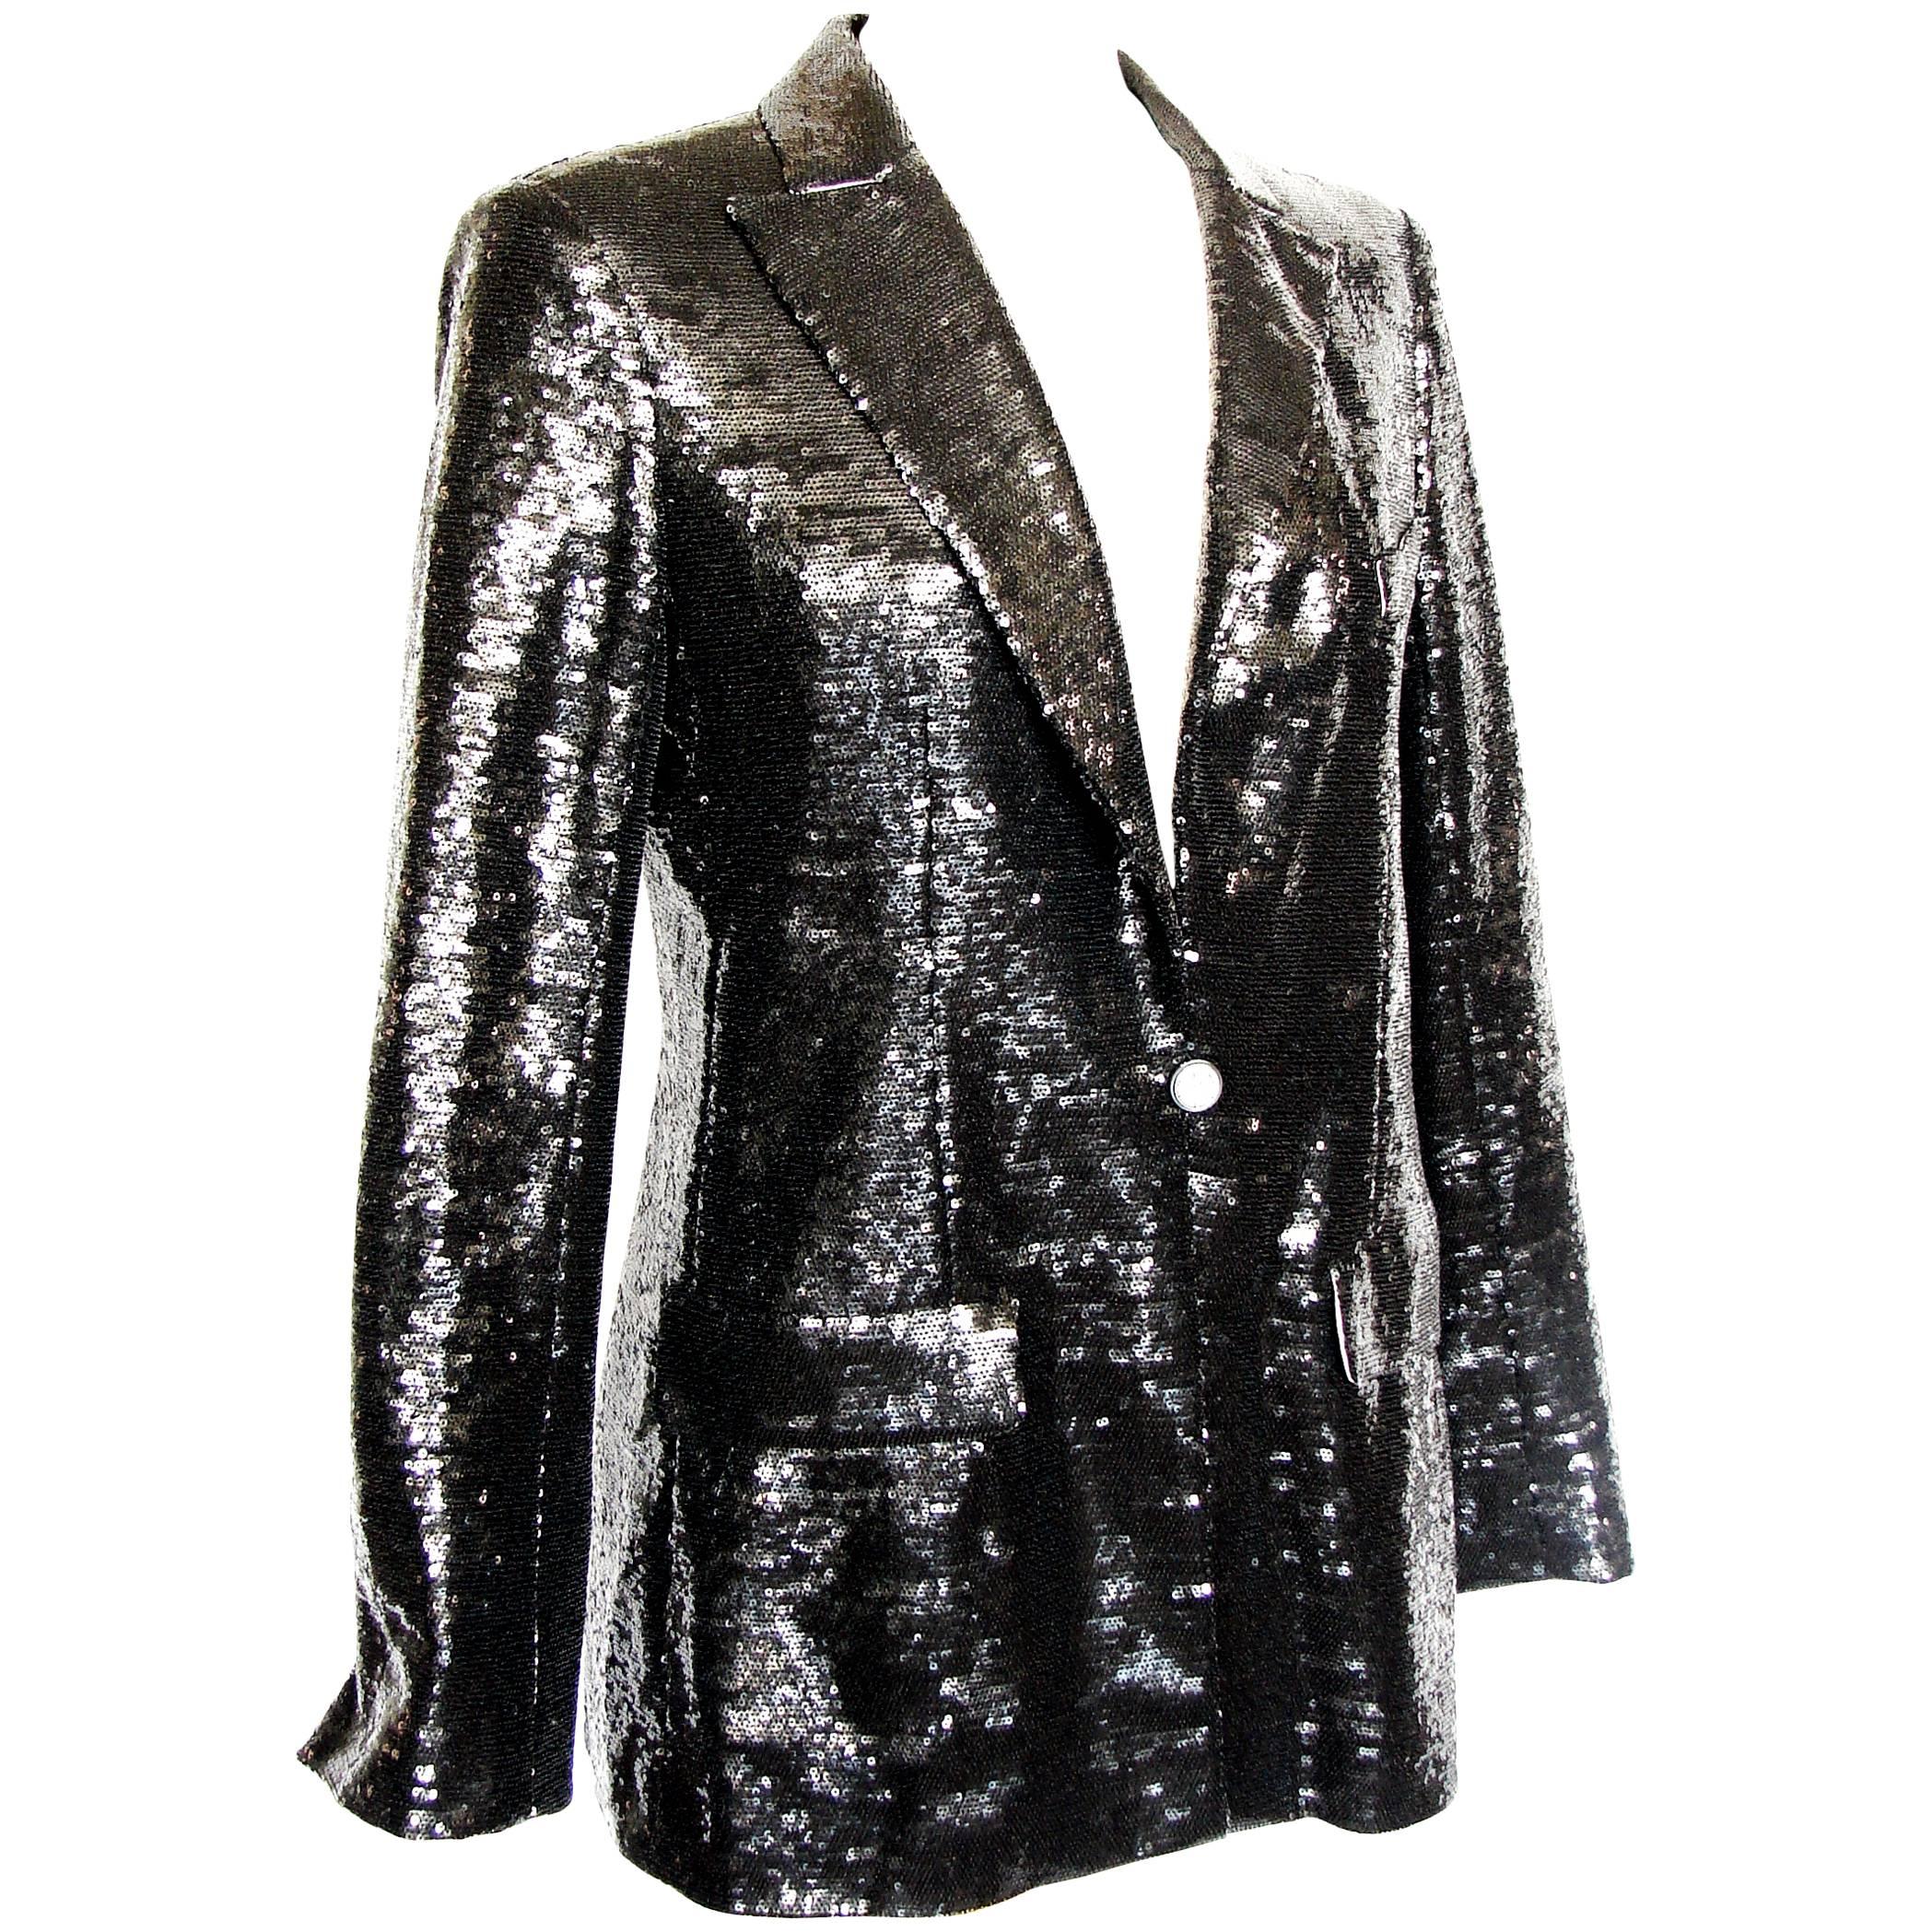 Chanel Evening Jacket Black Sequins with Contrast Cuffs and Collar Sz 44 09C 